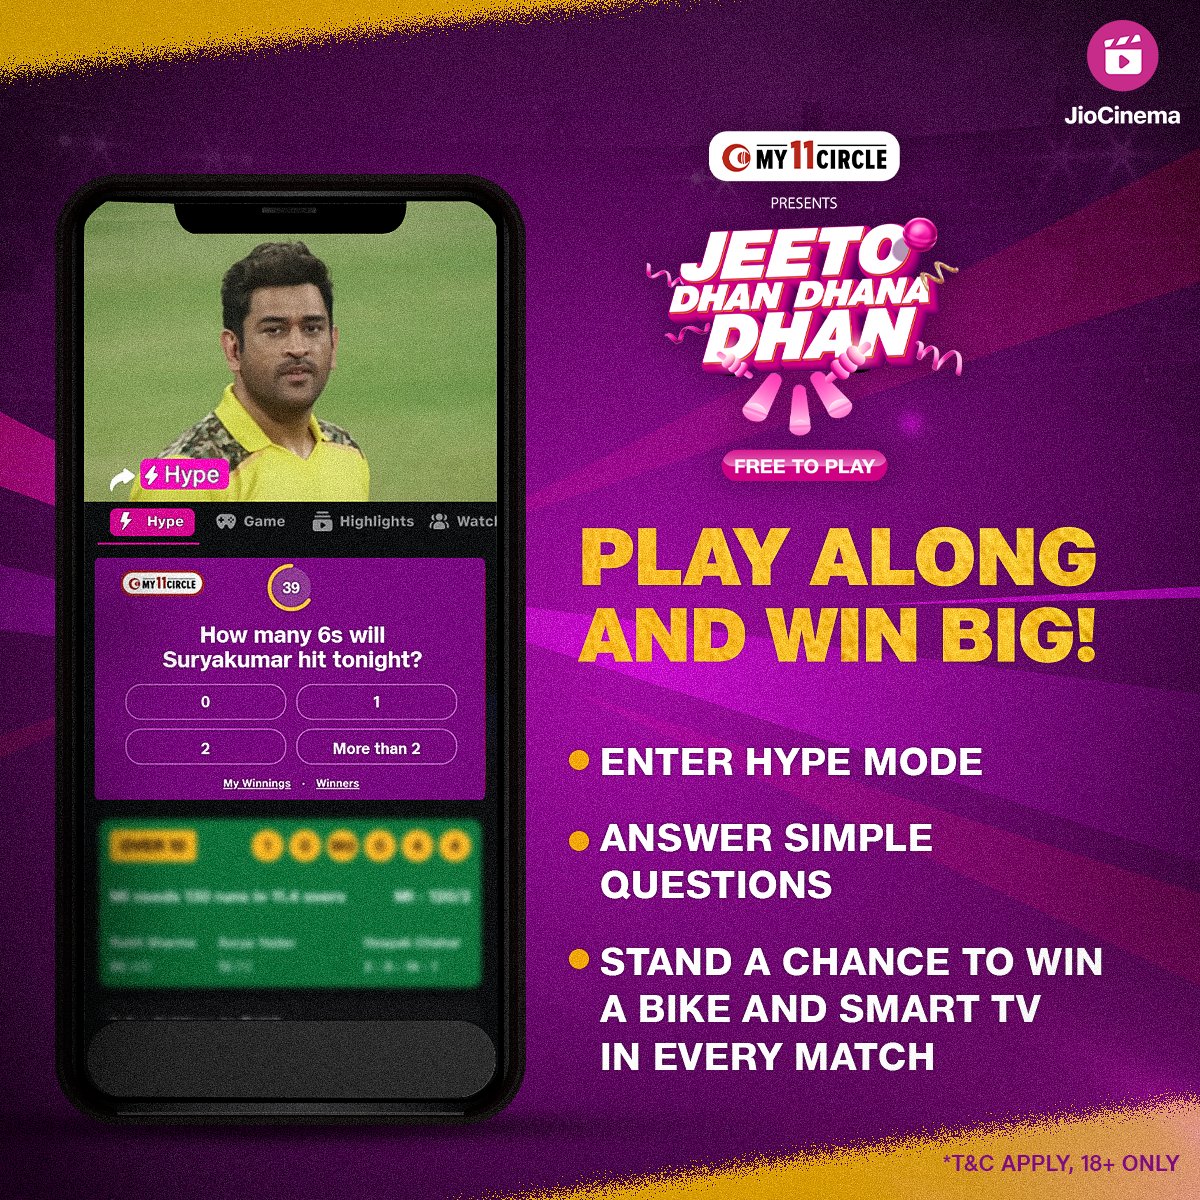 Guess it right & stand a chance to win big 🏆🤩

Answer questions & stand a chance to win cars, bikes, smart TVs, & much more with the #My11Circle presents #JeetoDhanDhanaDhan, on #JioCinema 😎

Keep playing & don’t forget to make your team on the @my11circle app

*T&C Apply, 18+